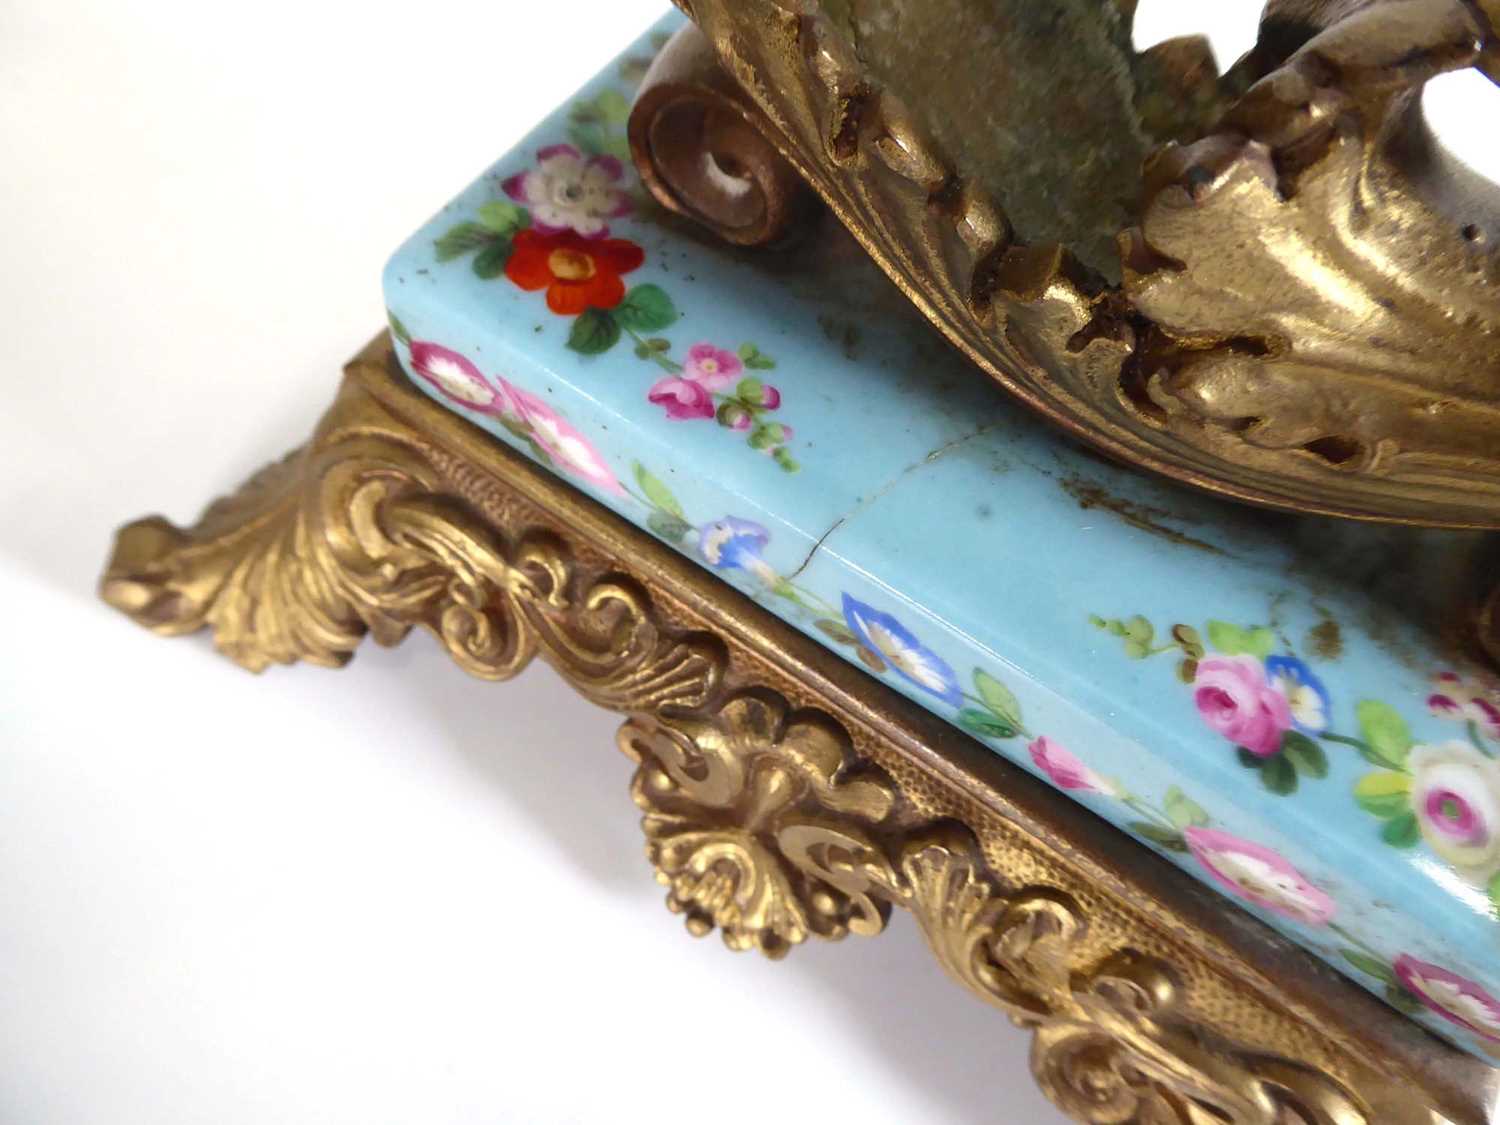 A late 19th/early 20th century gilt metal mounted cornucopia vase decorated with floral sprays and - Image 6 of 7